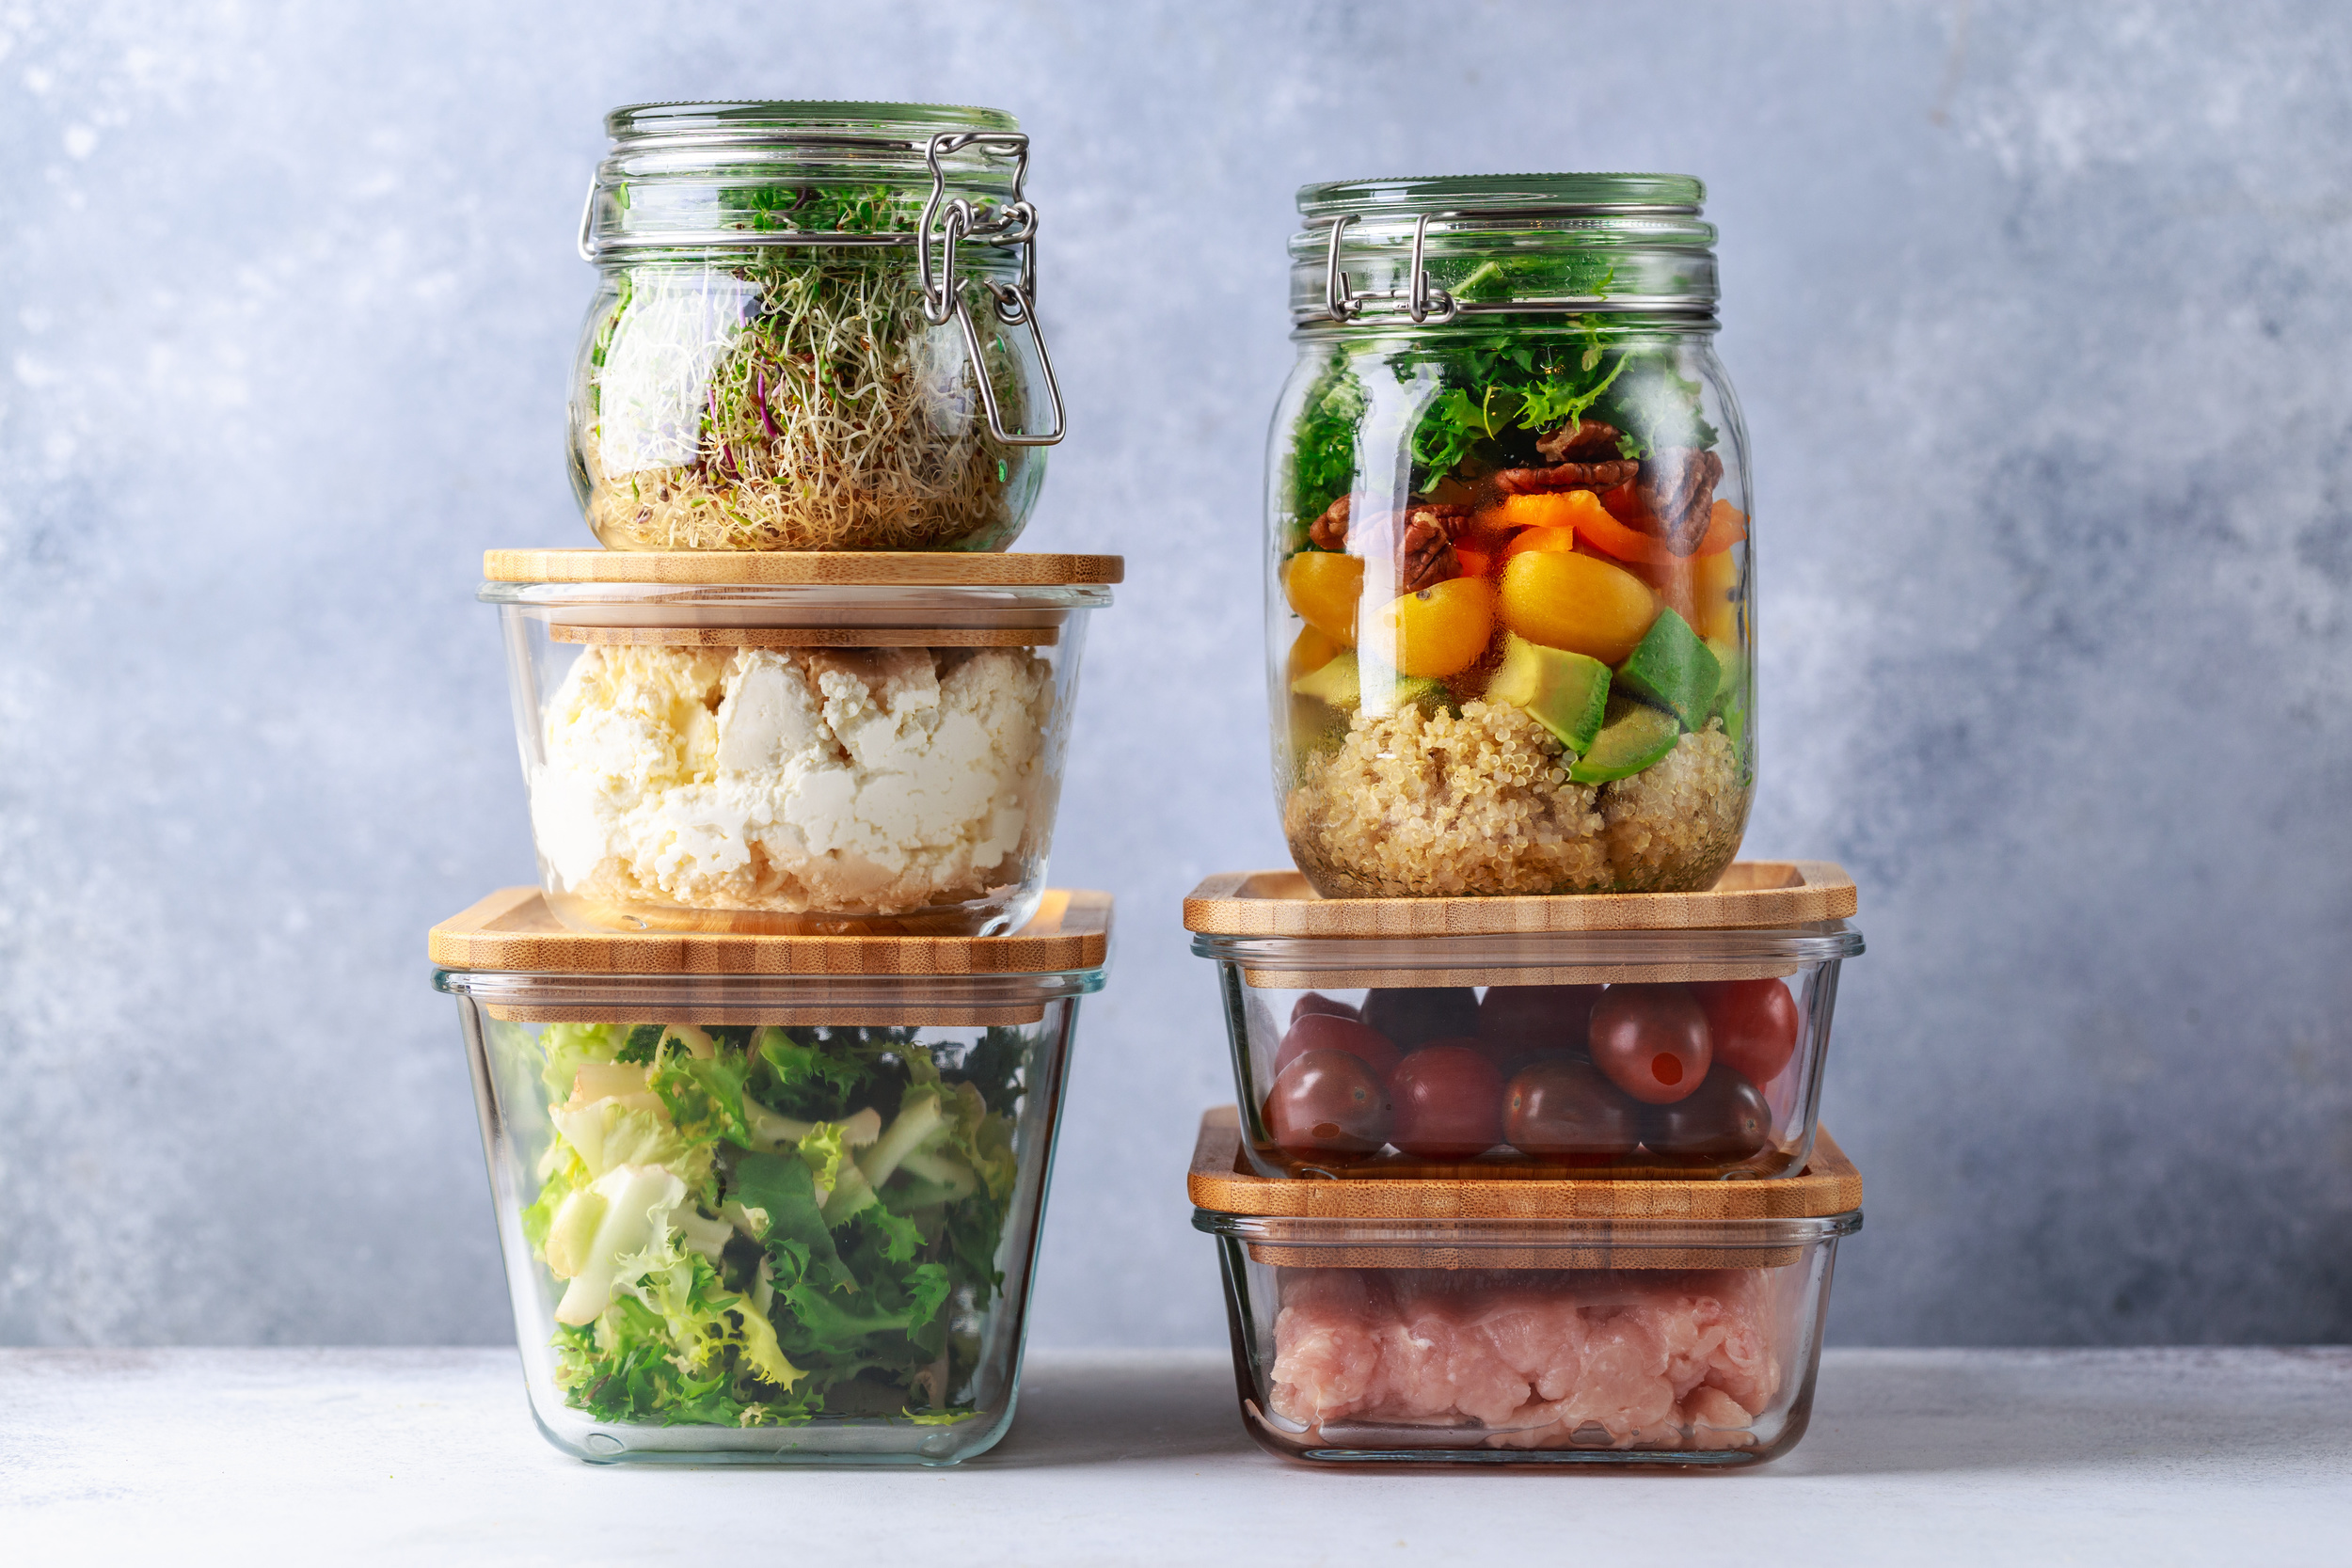 <p>Next time you need new food storage containers, skip the cheap plastic tubs at the supermarket — they'll wear out and need replacing quickly. Instead, spend just a little more on glass containers with sturdy lids that will last for years, even with daily use.  </p>